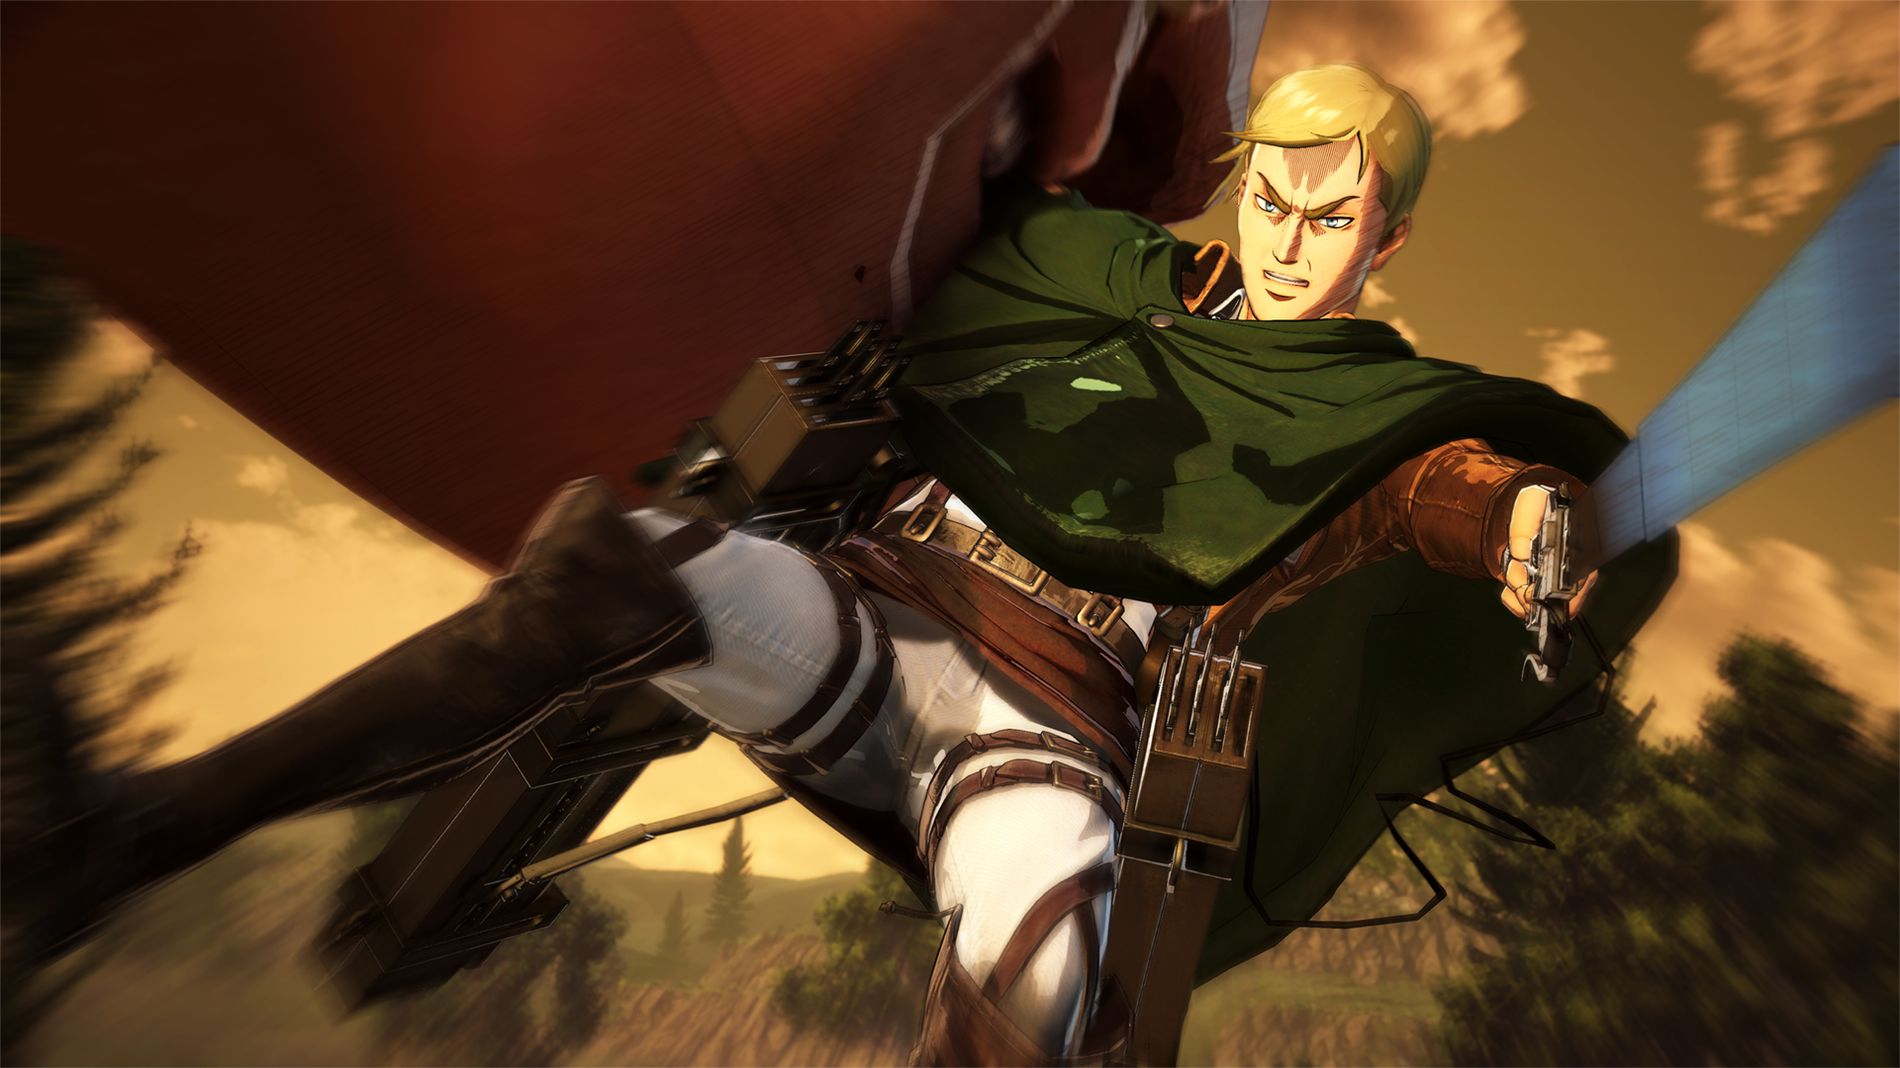 http://www.perfectly-nintendo.com/wp-content/gallery/attack-on-titan-2-24-10-2017/Attack-on-Titan-2-19.jpg